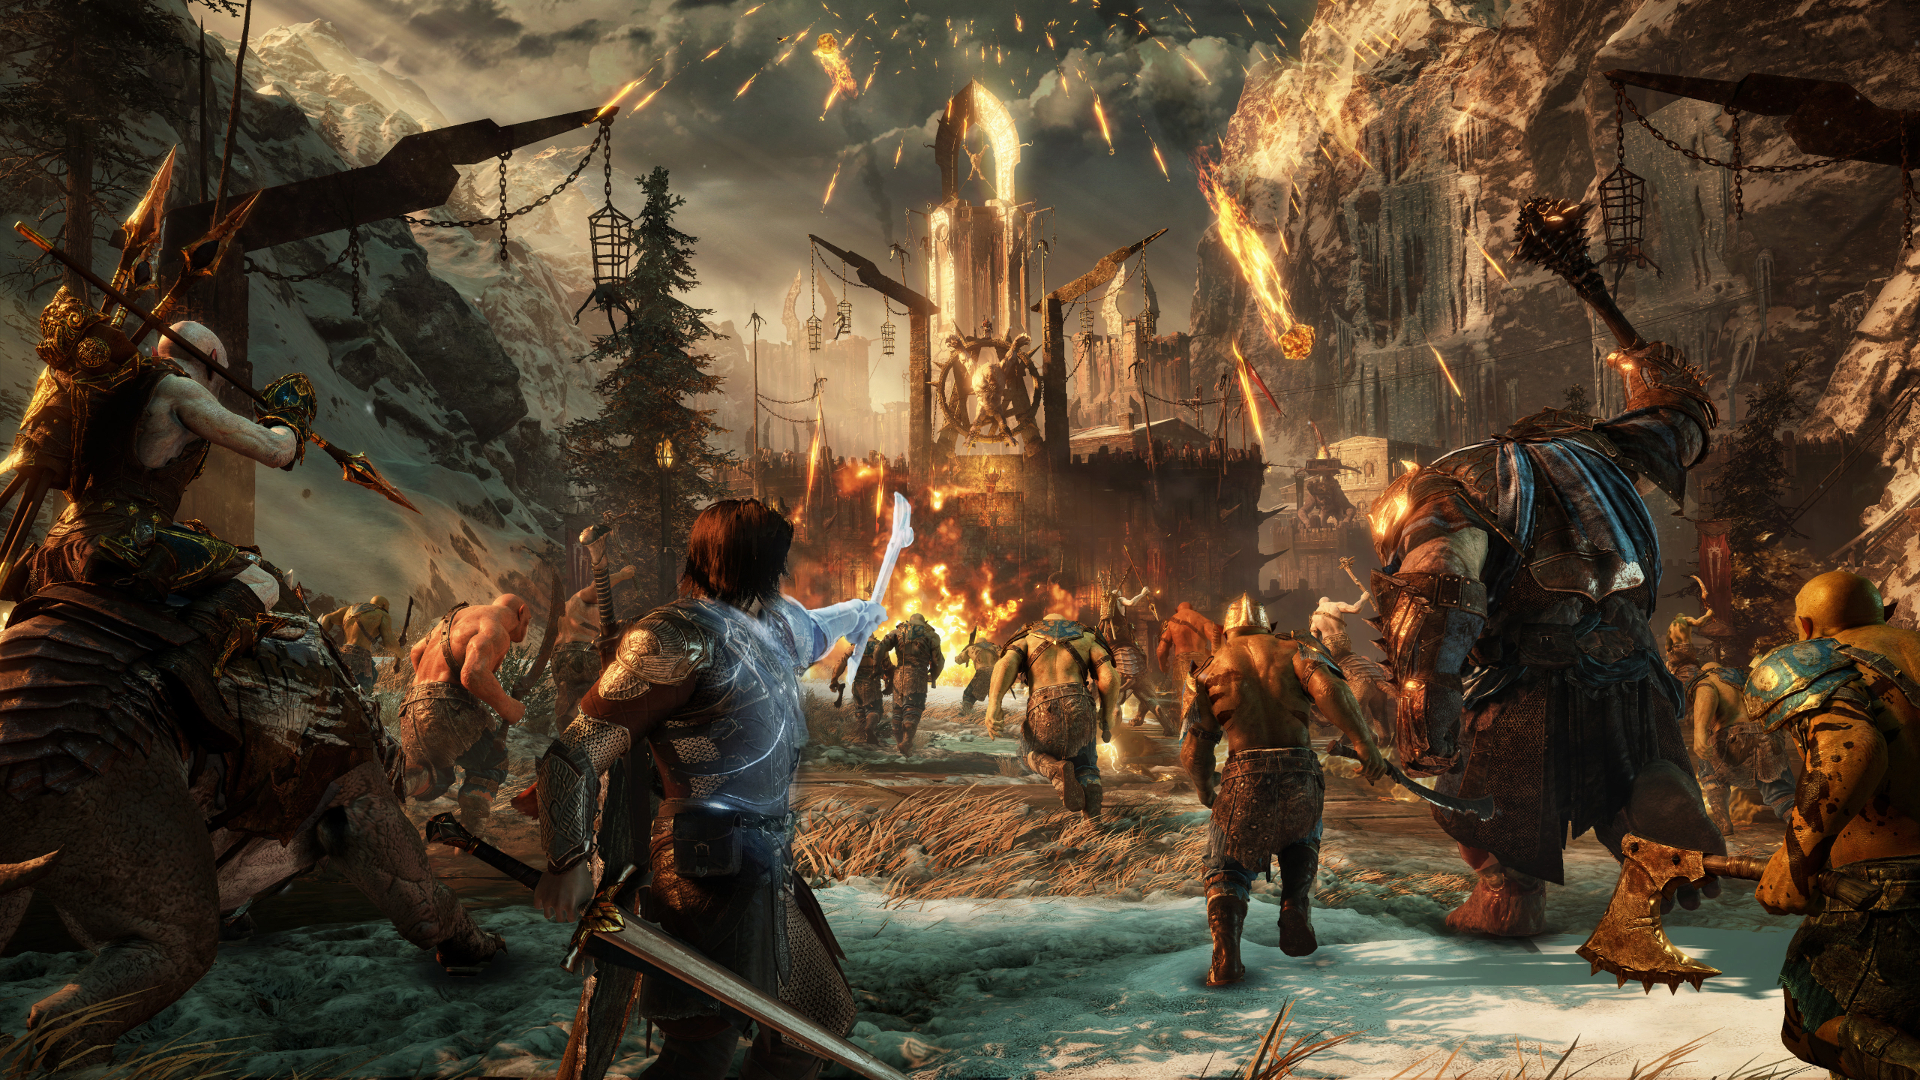 Middle-Earth: Shadow Of War’s Nemesis System Is About Friends As Well As Foes